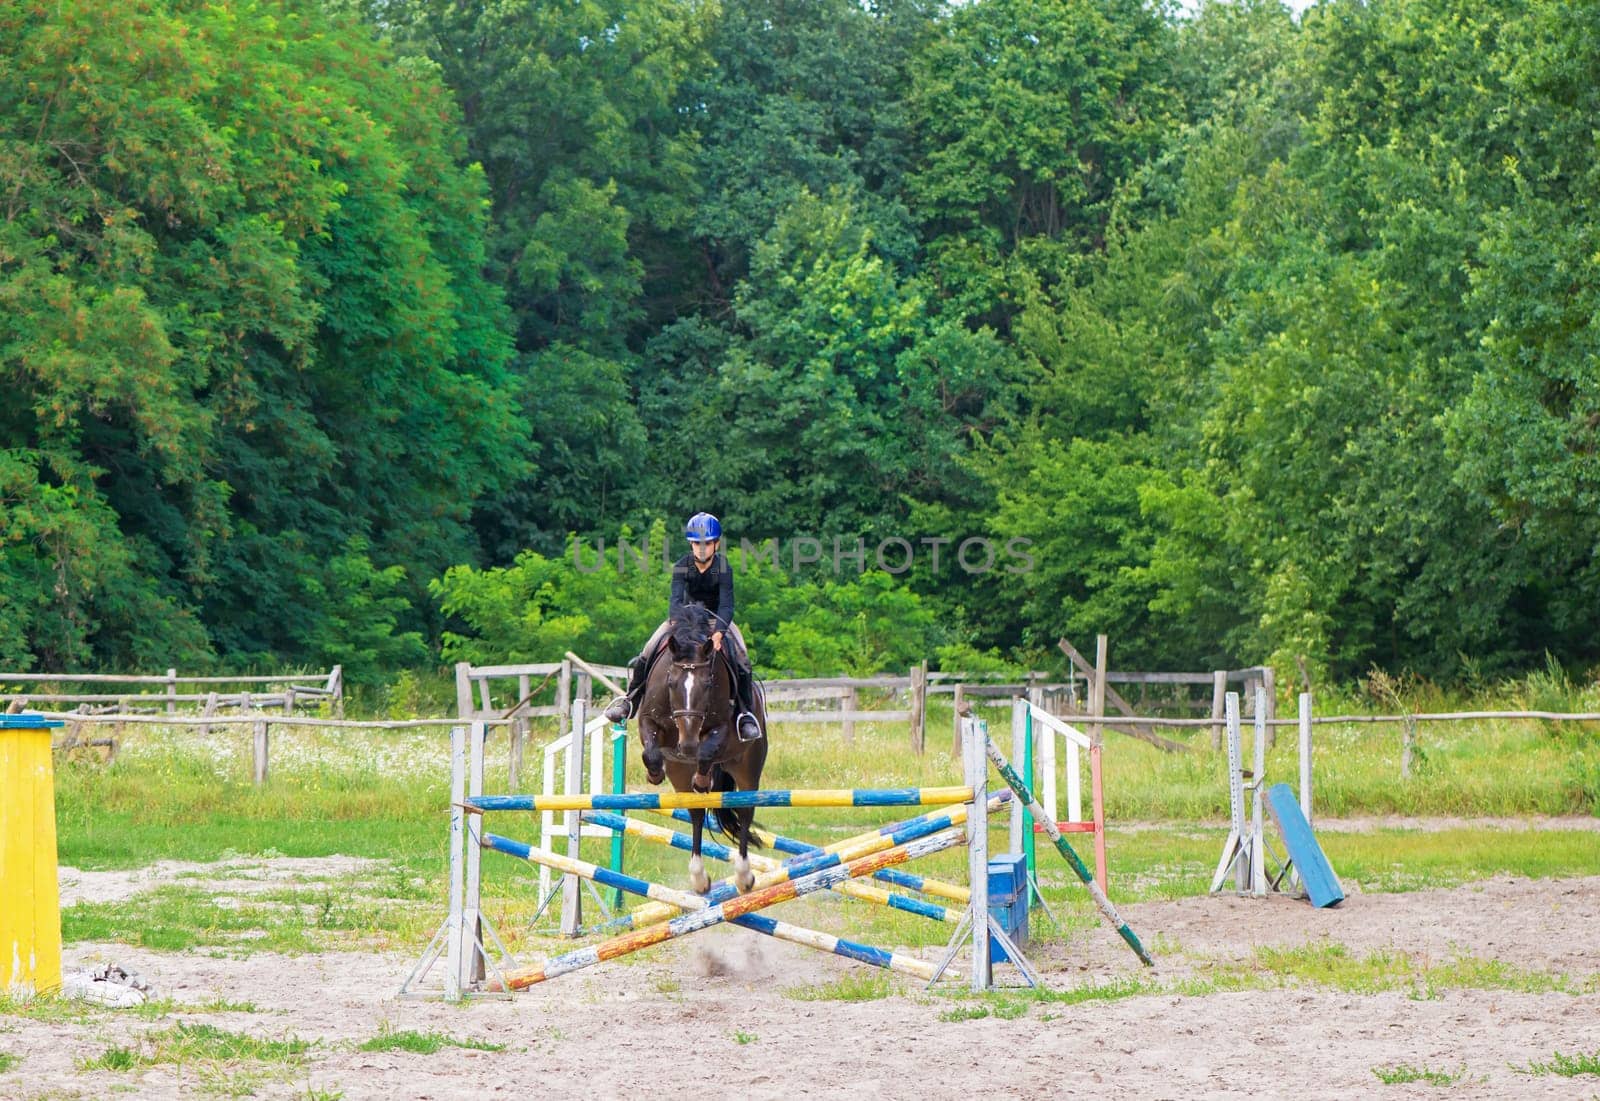 Young rider at show jumping. Horse rider jumps over hurdle by aprilphoto